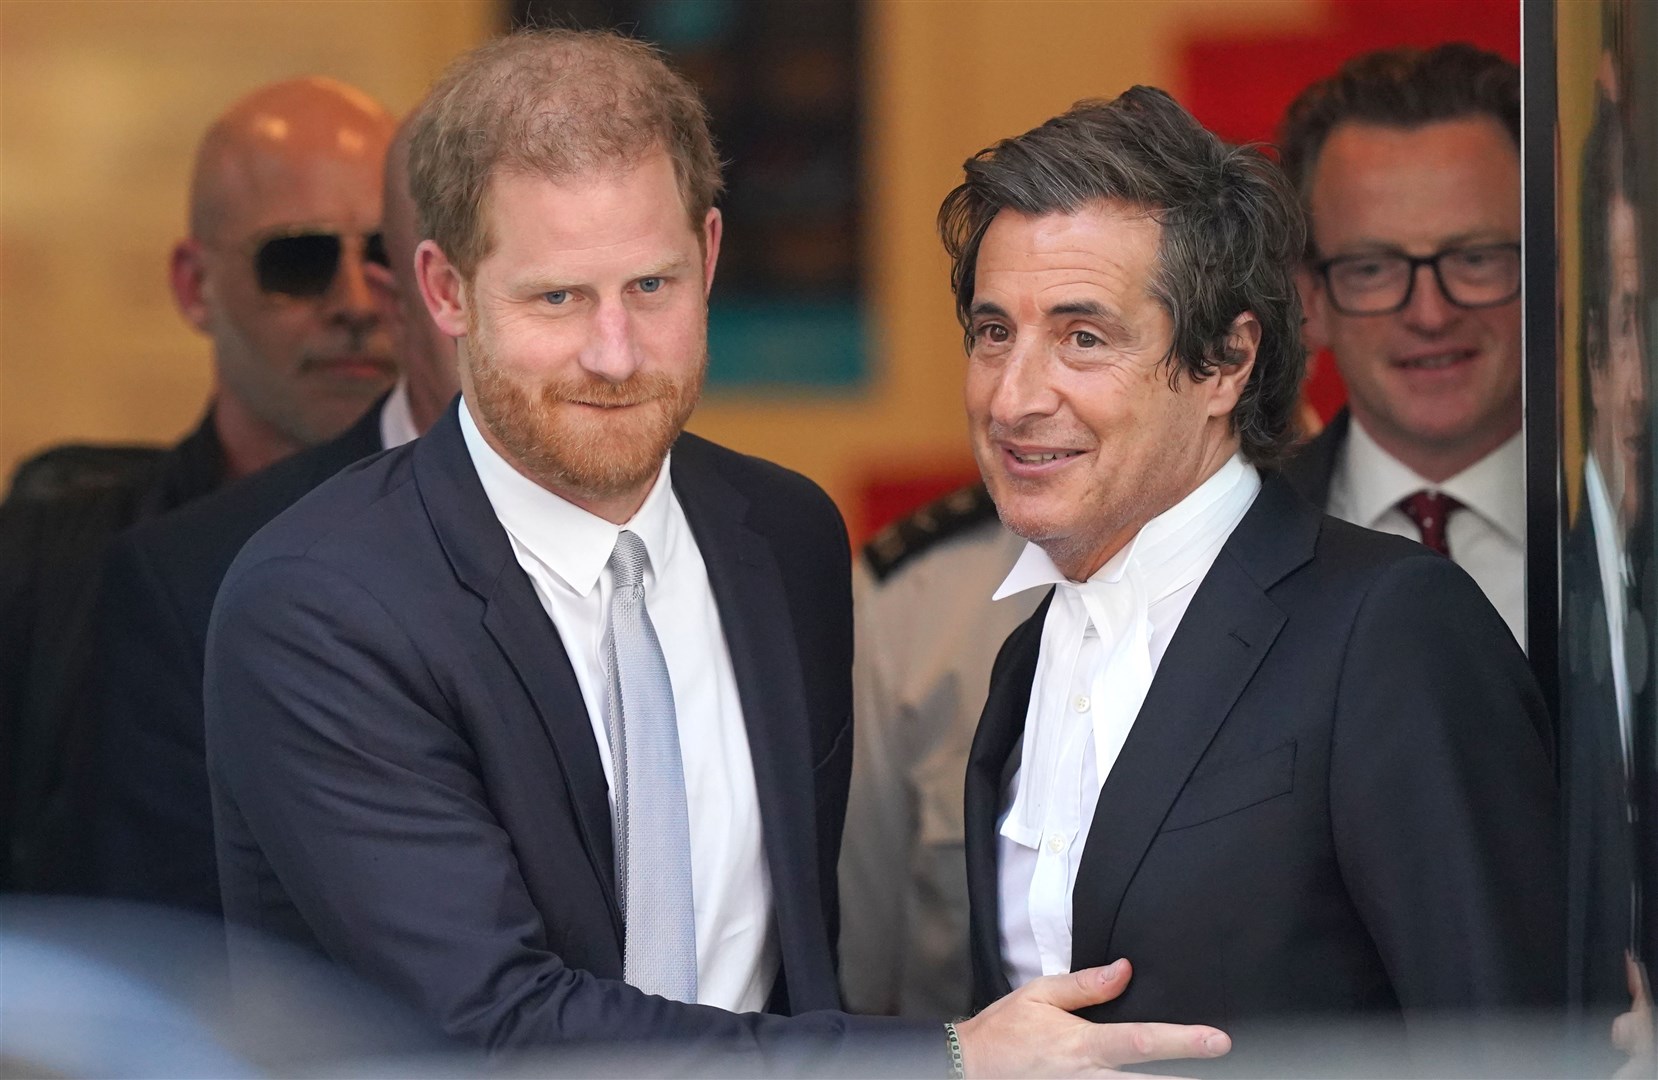 The Duke of Sussex with his barrister David Sherborne (Jonathan Brady/PA)